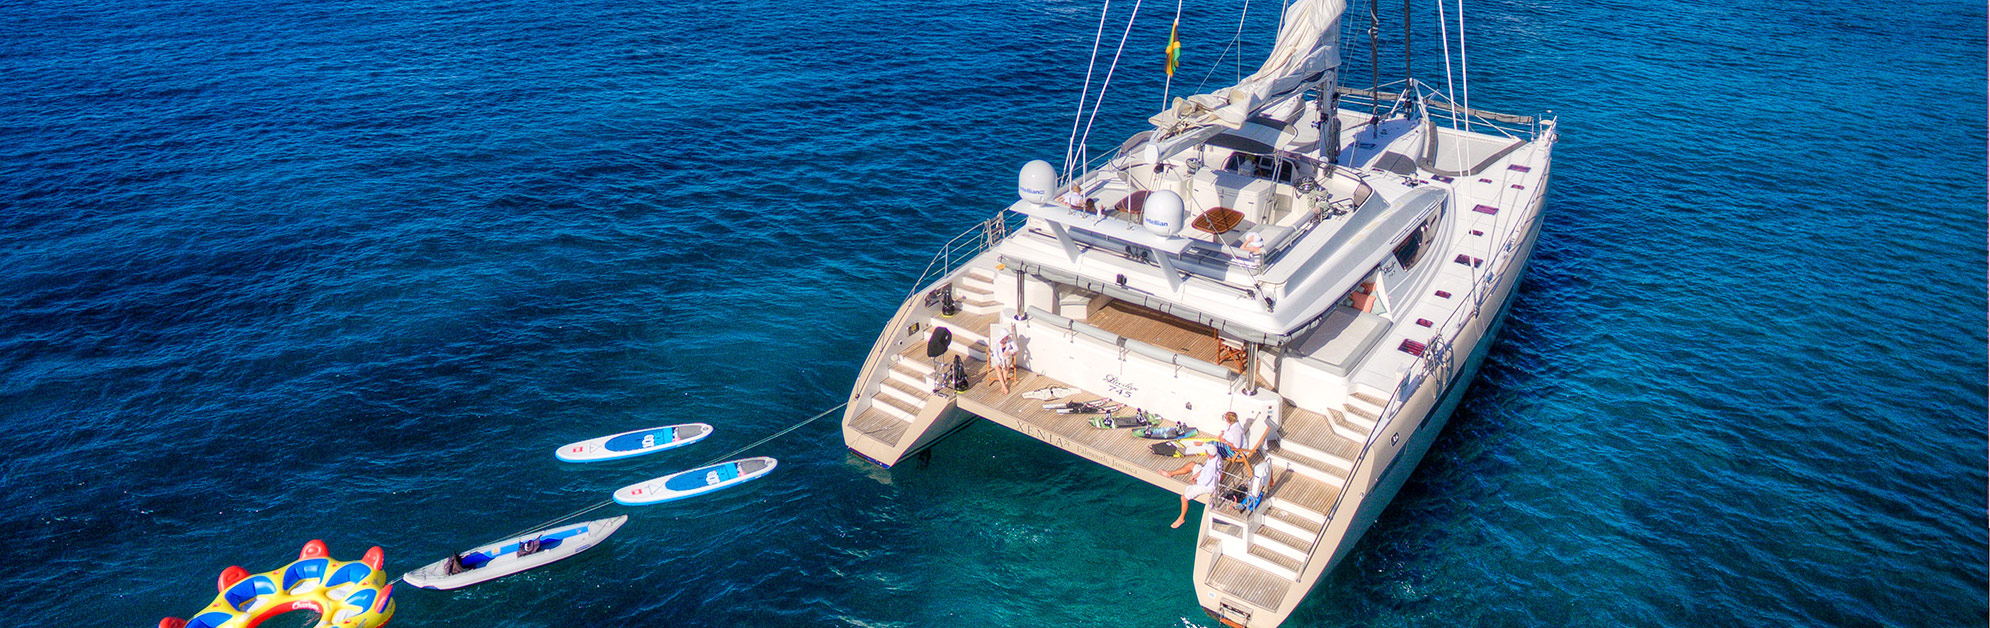 Crewed Yacht Charter Costs